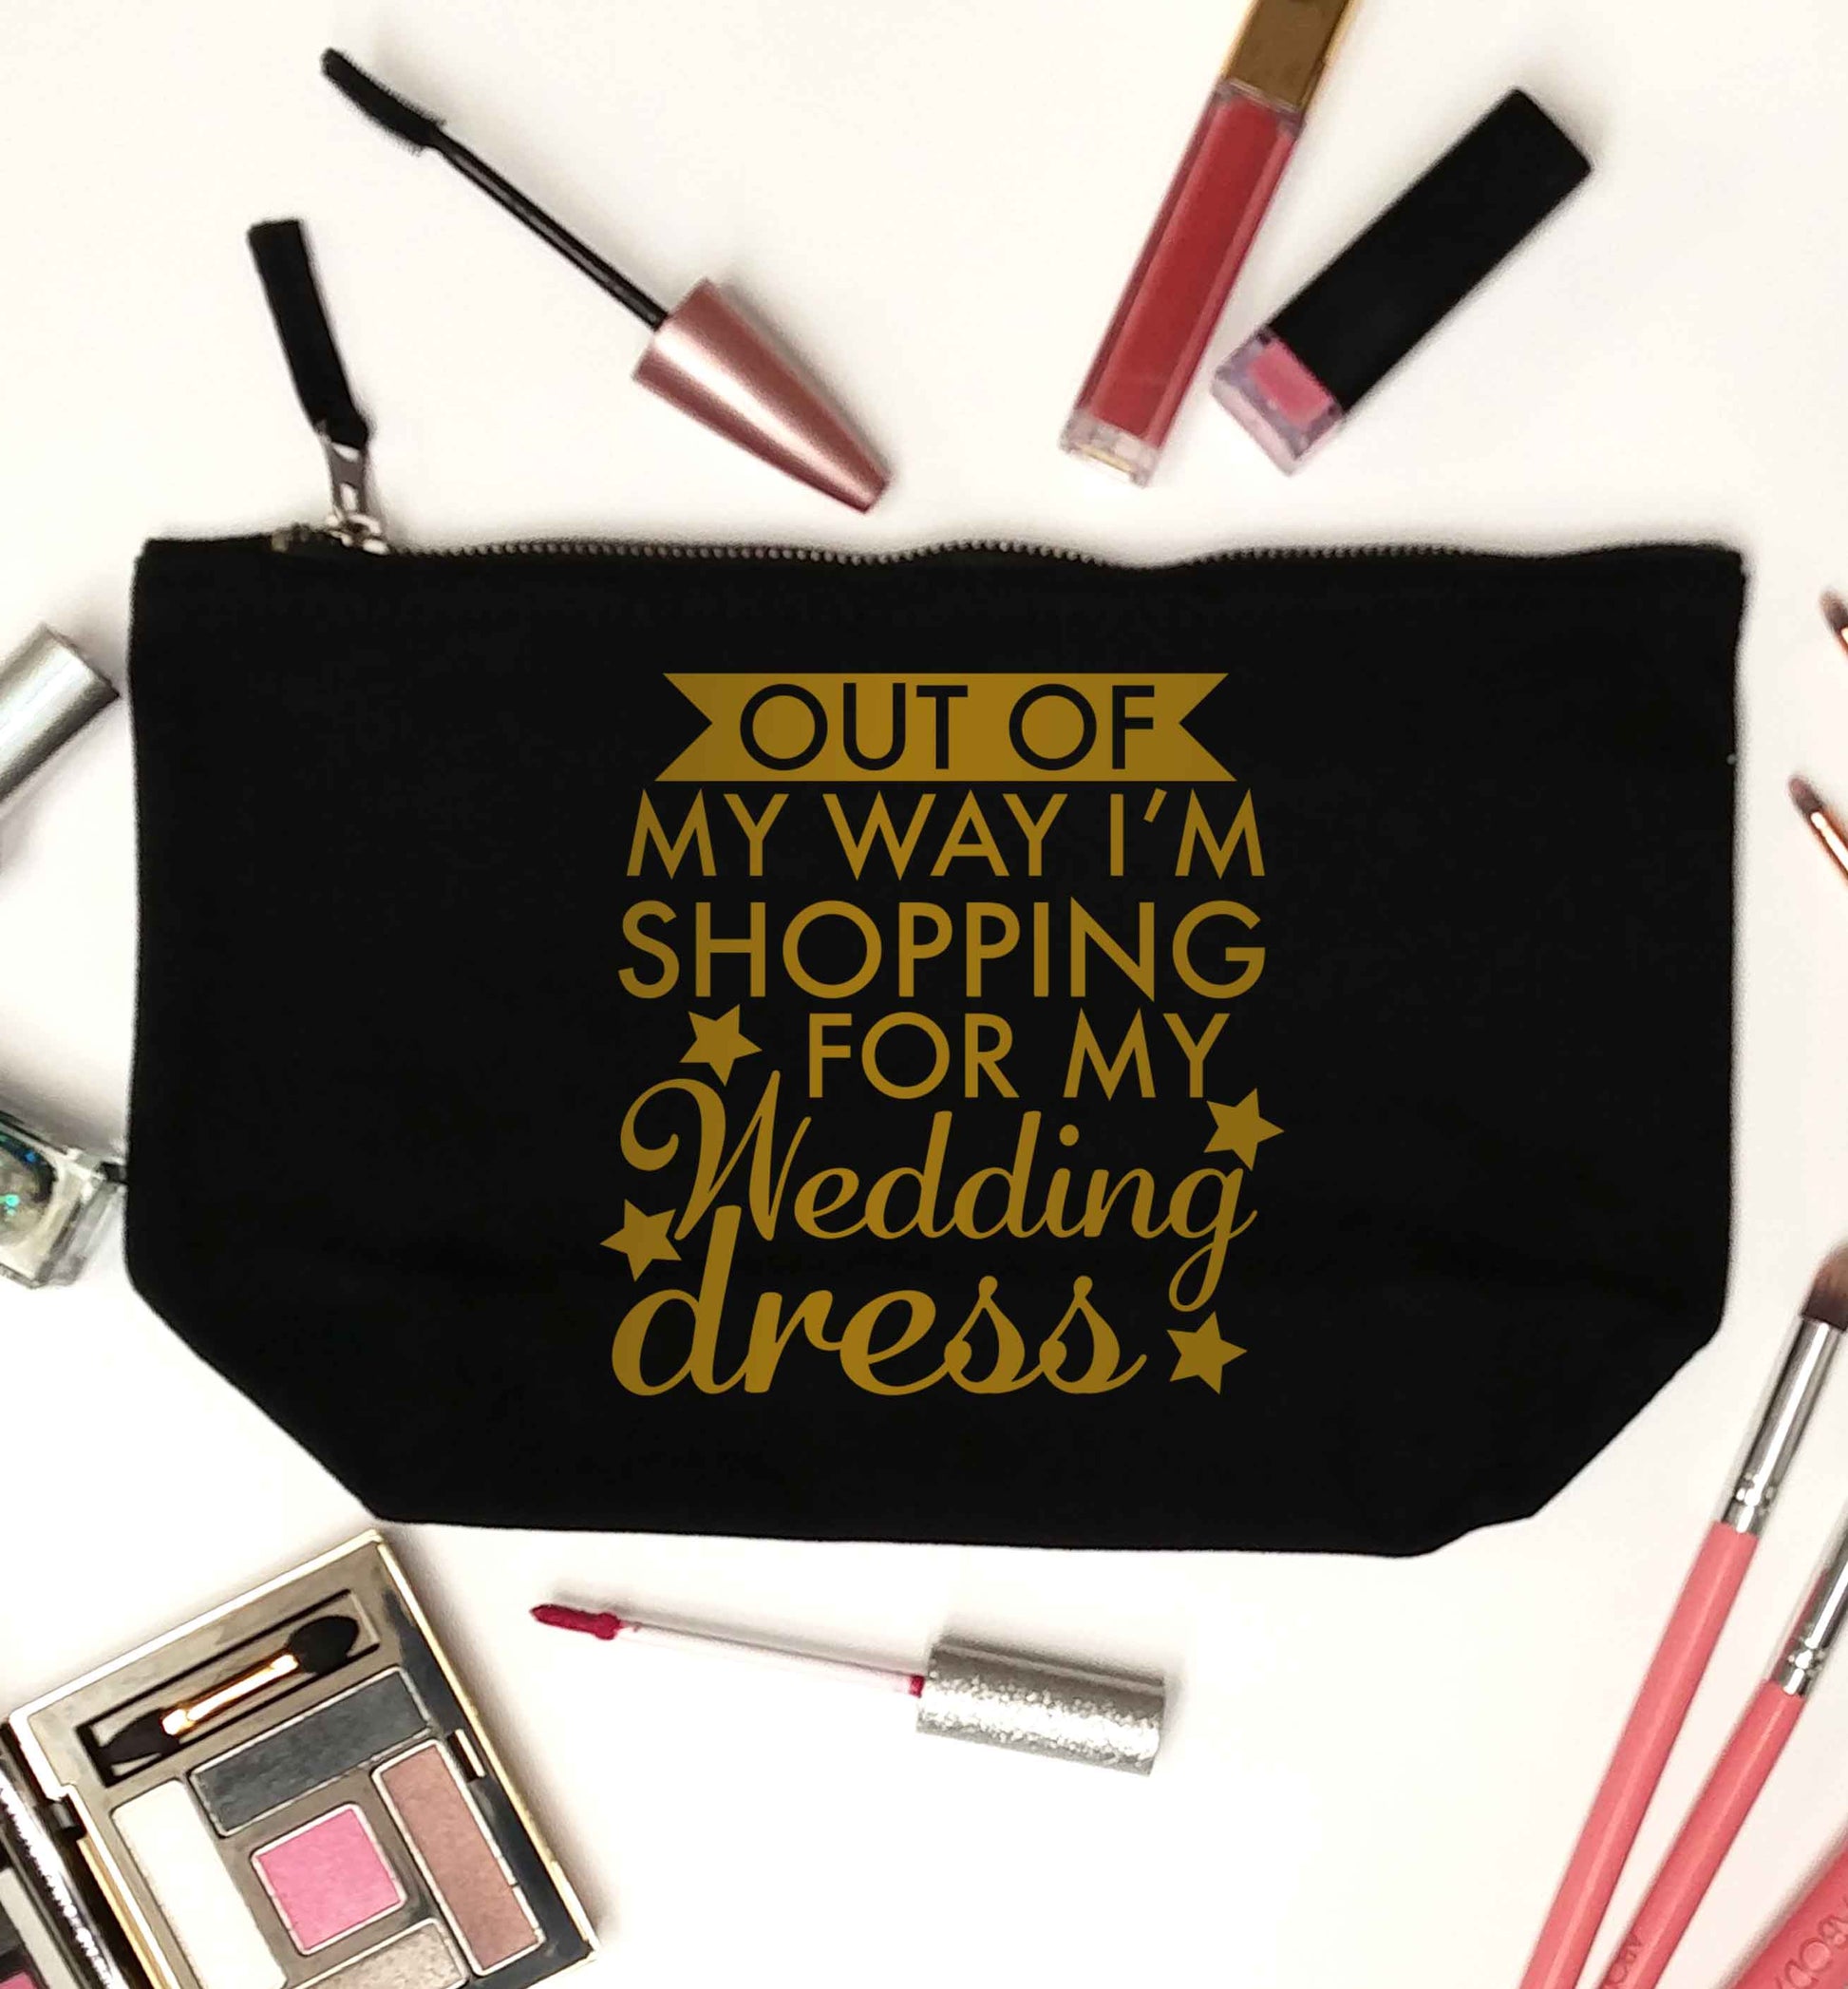 Out of my way I'm shopping for my wedding dress black makeup bag